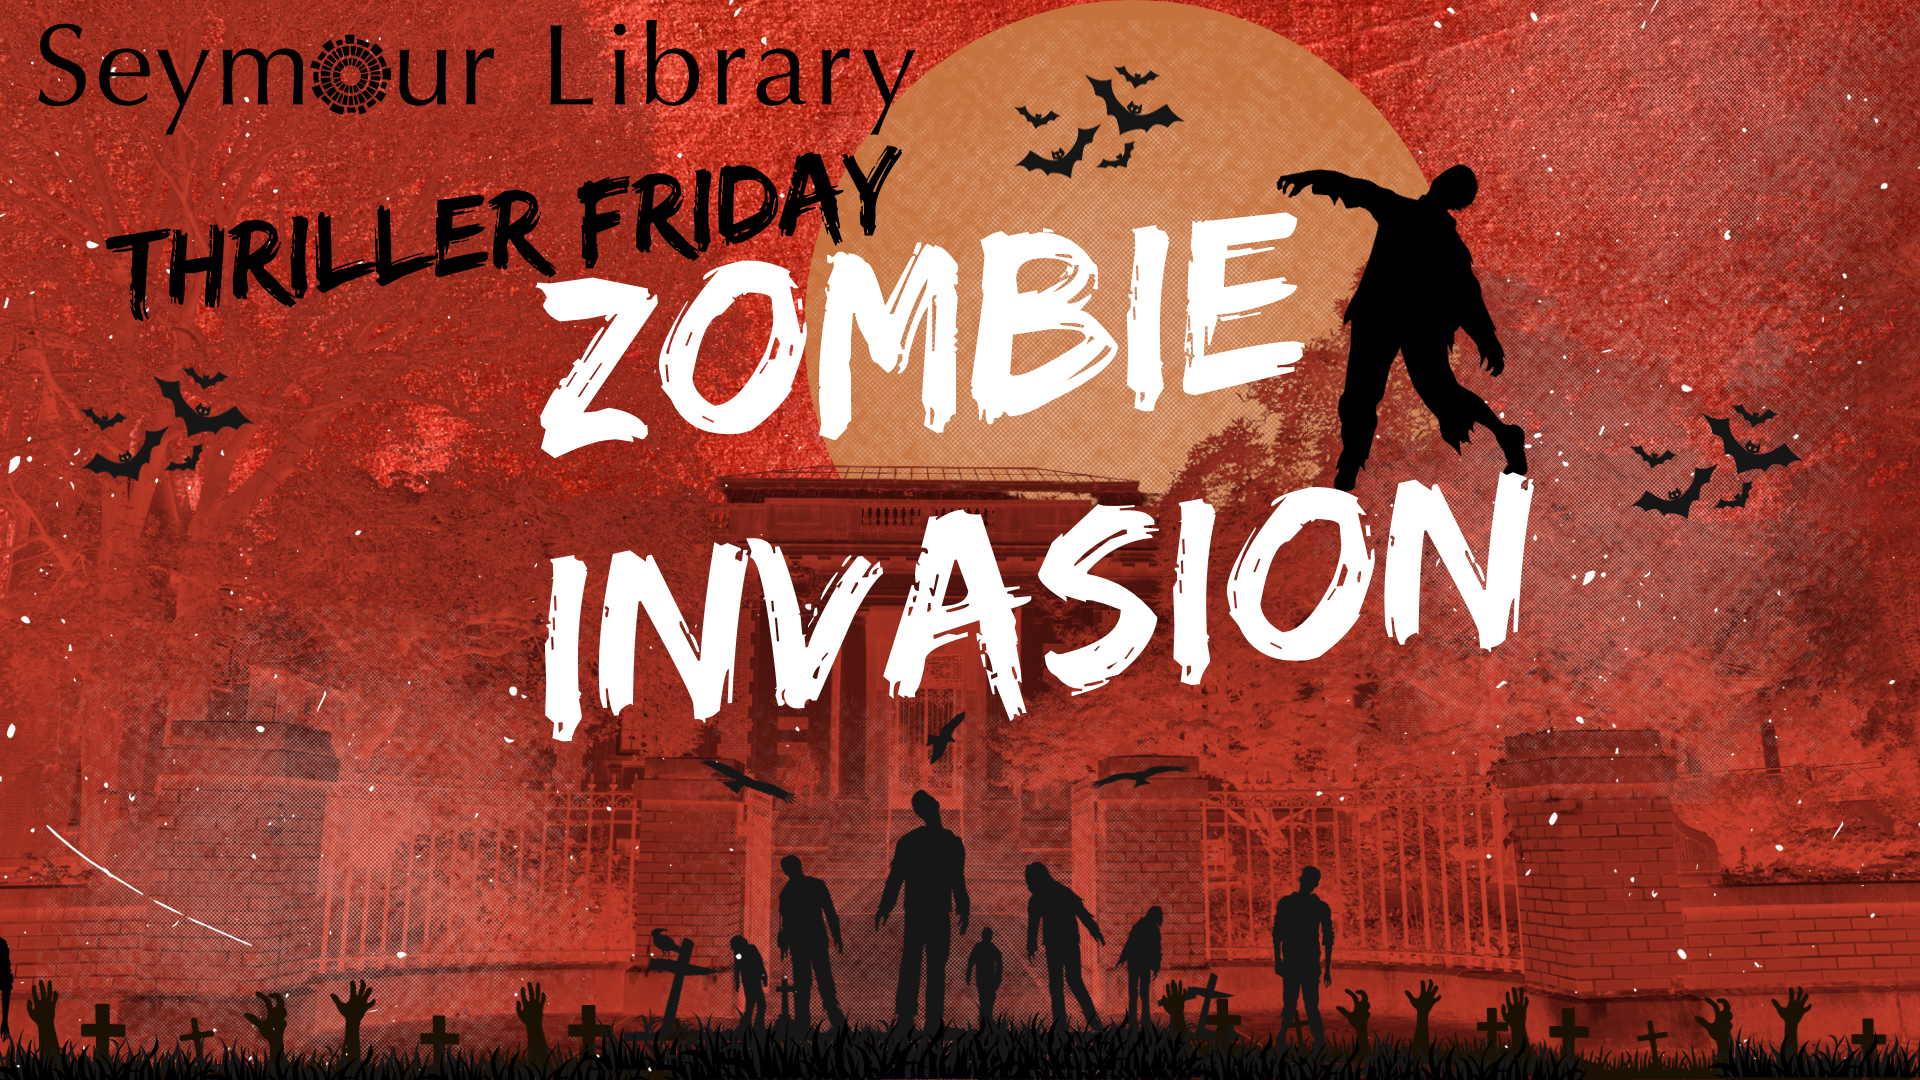 Thriller Friday Zombie Invasion with graphic of zombies in front of Seymour Library.